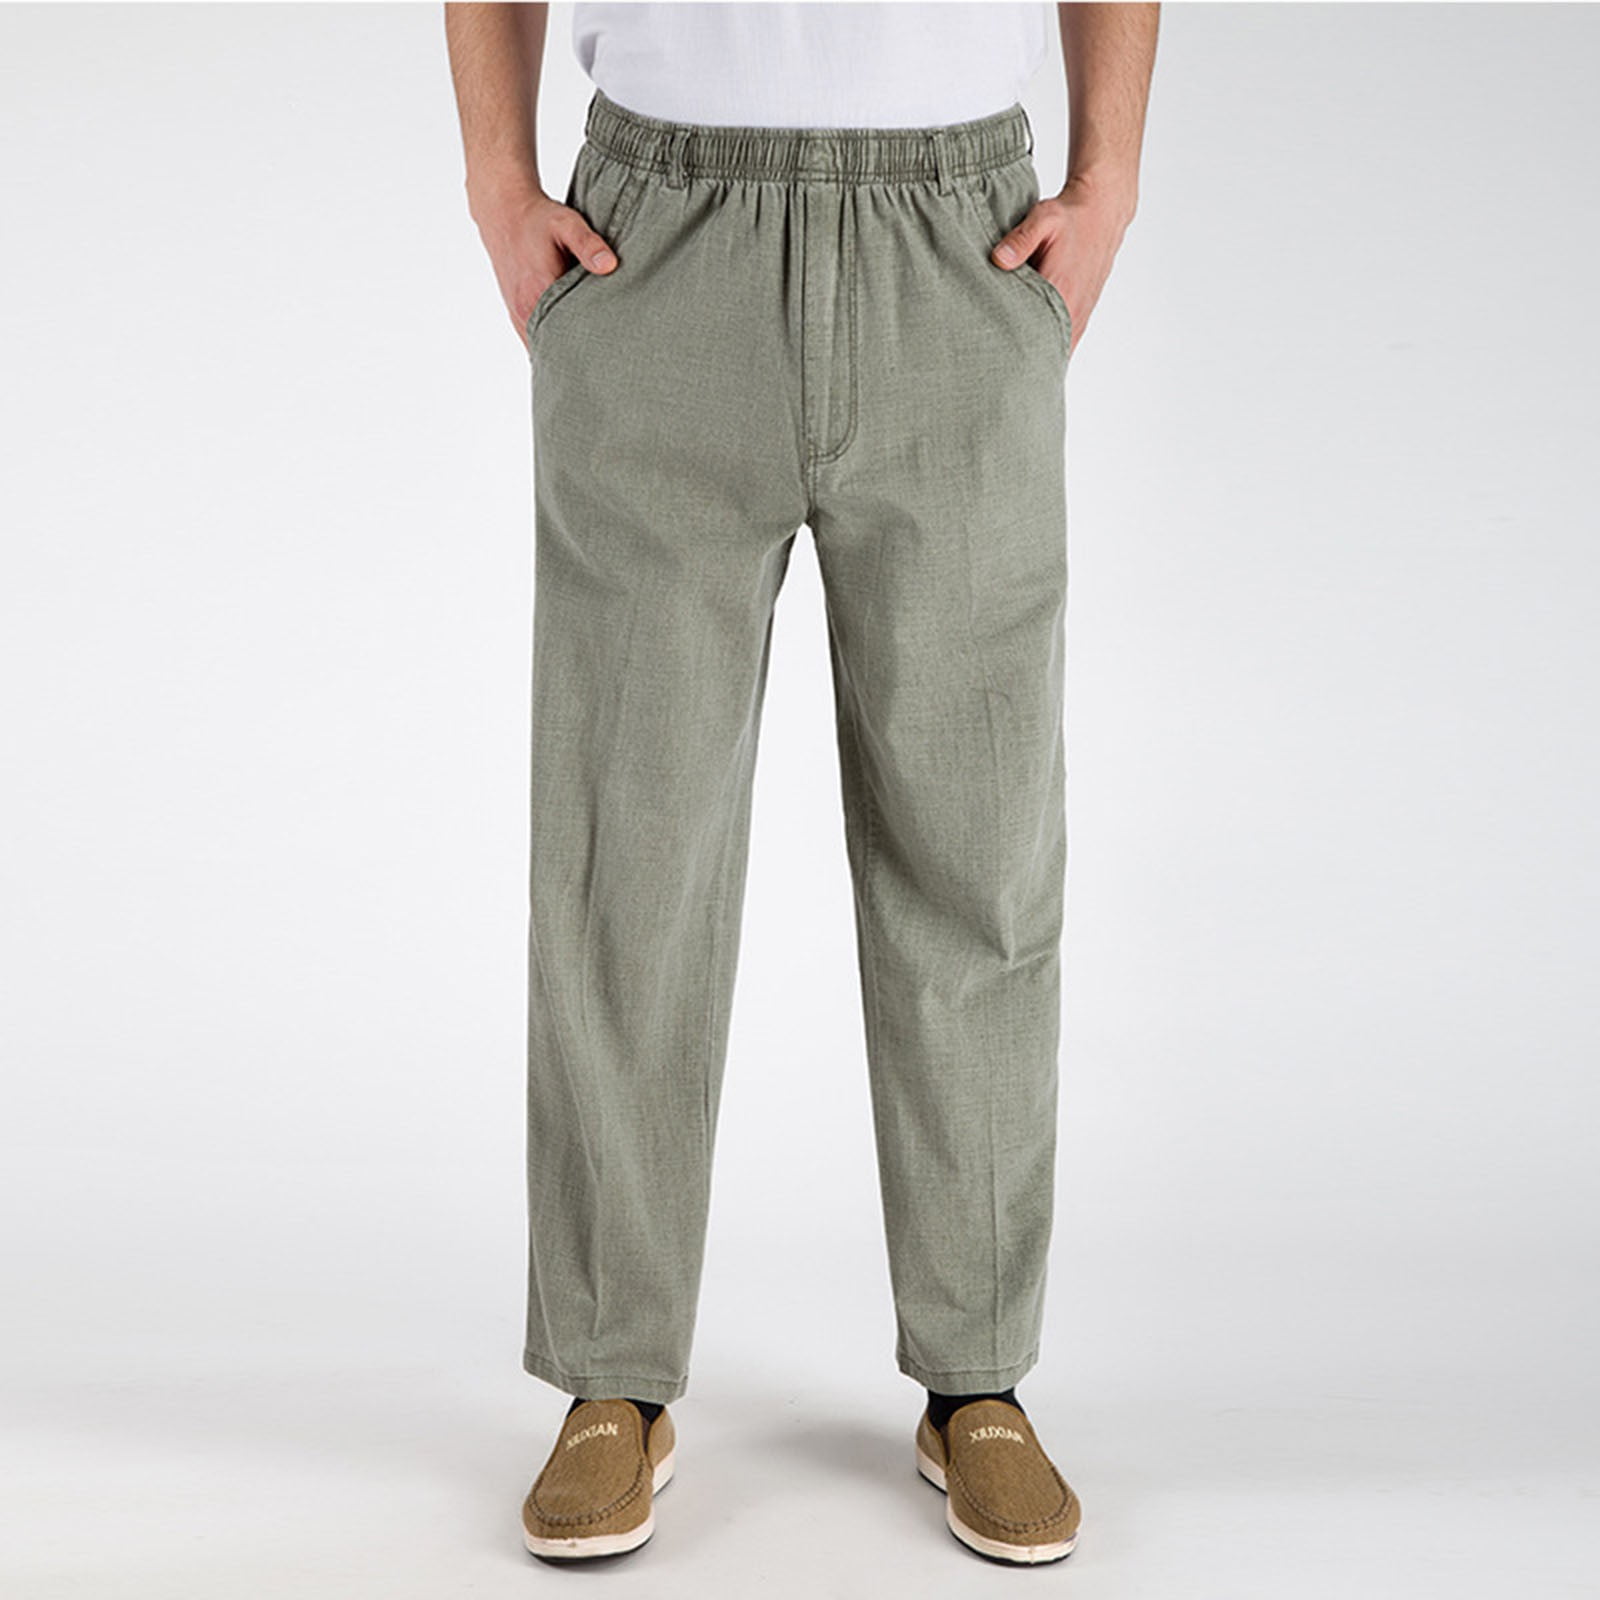 Mens Holiday Solid Casual Pants Thin Cotton Breathable Beach Pants Trousers  New  eBay